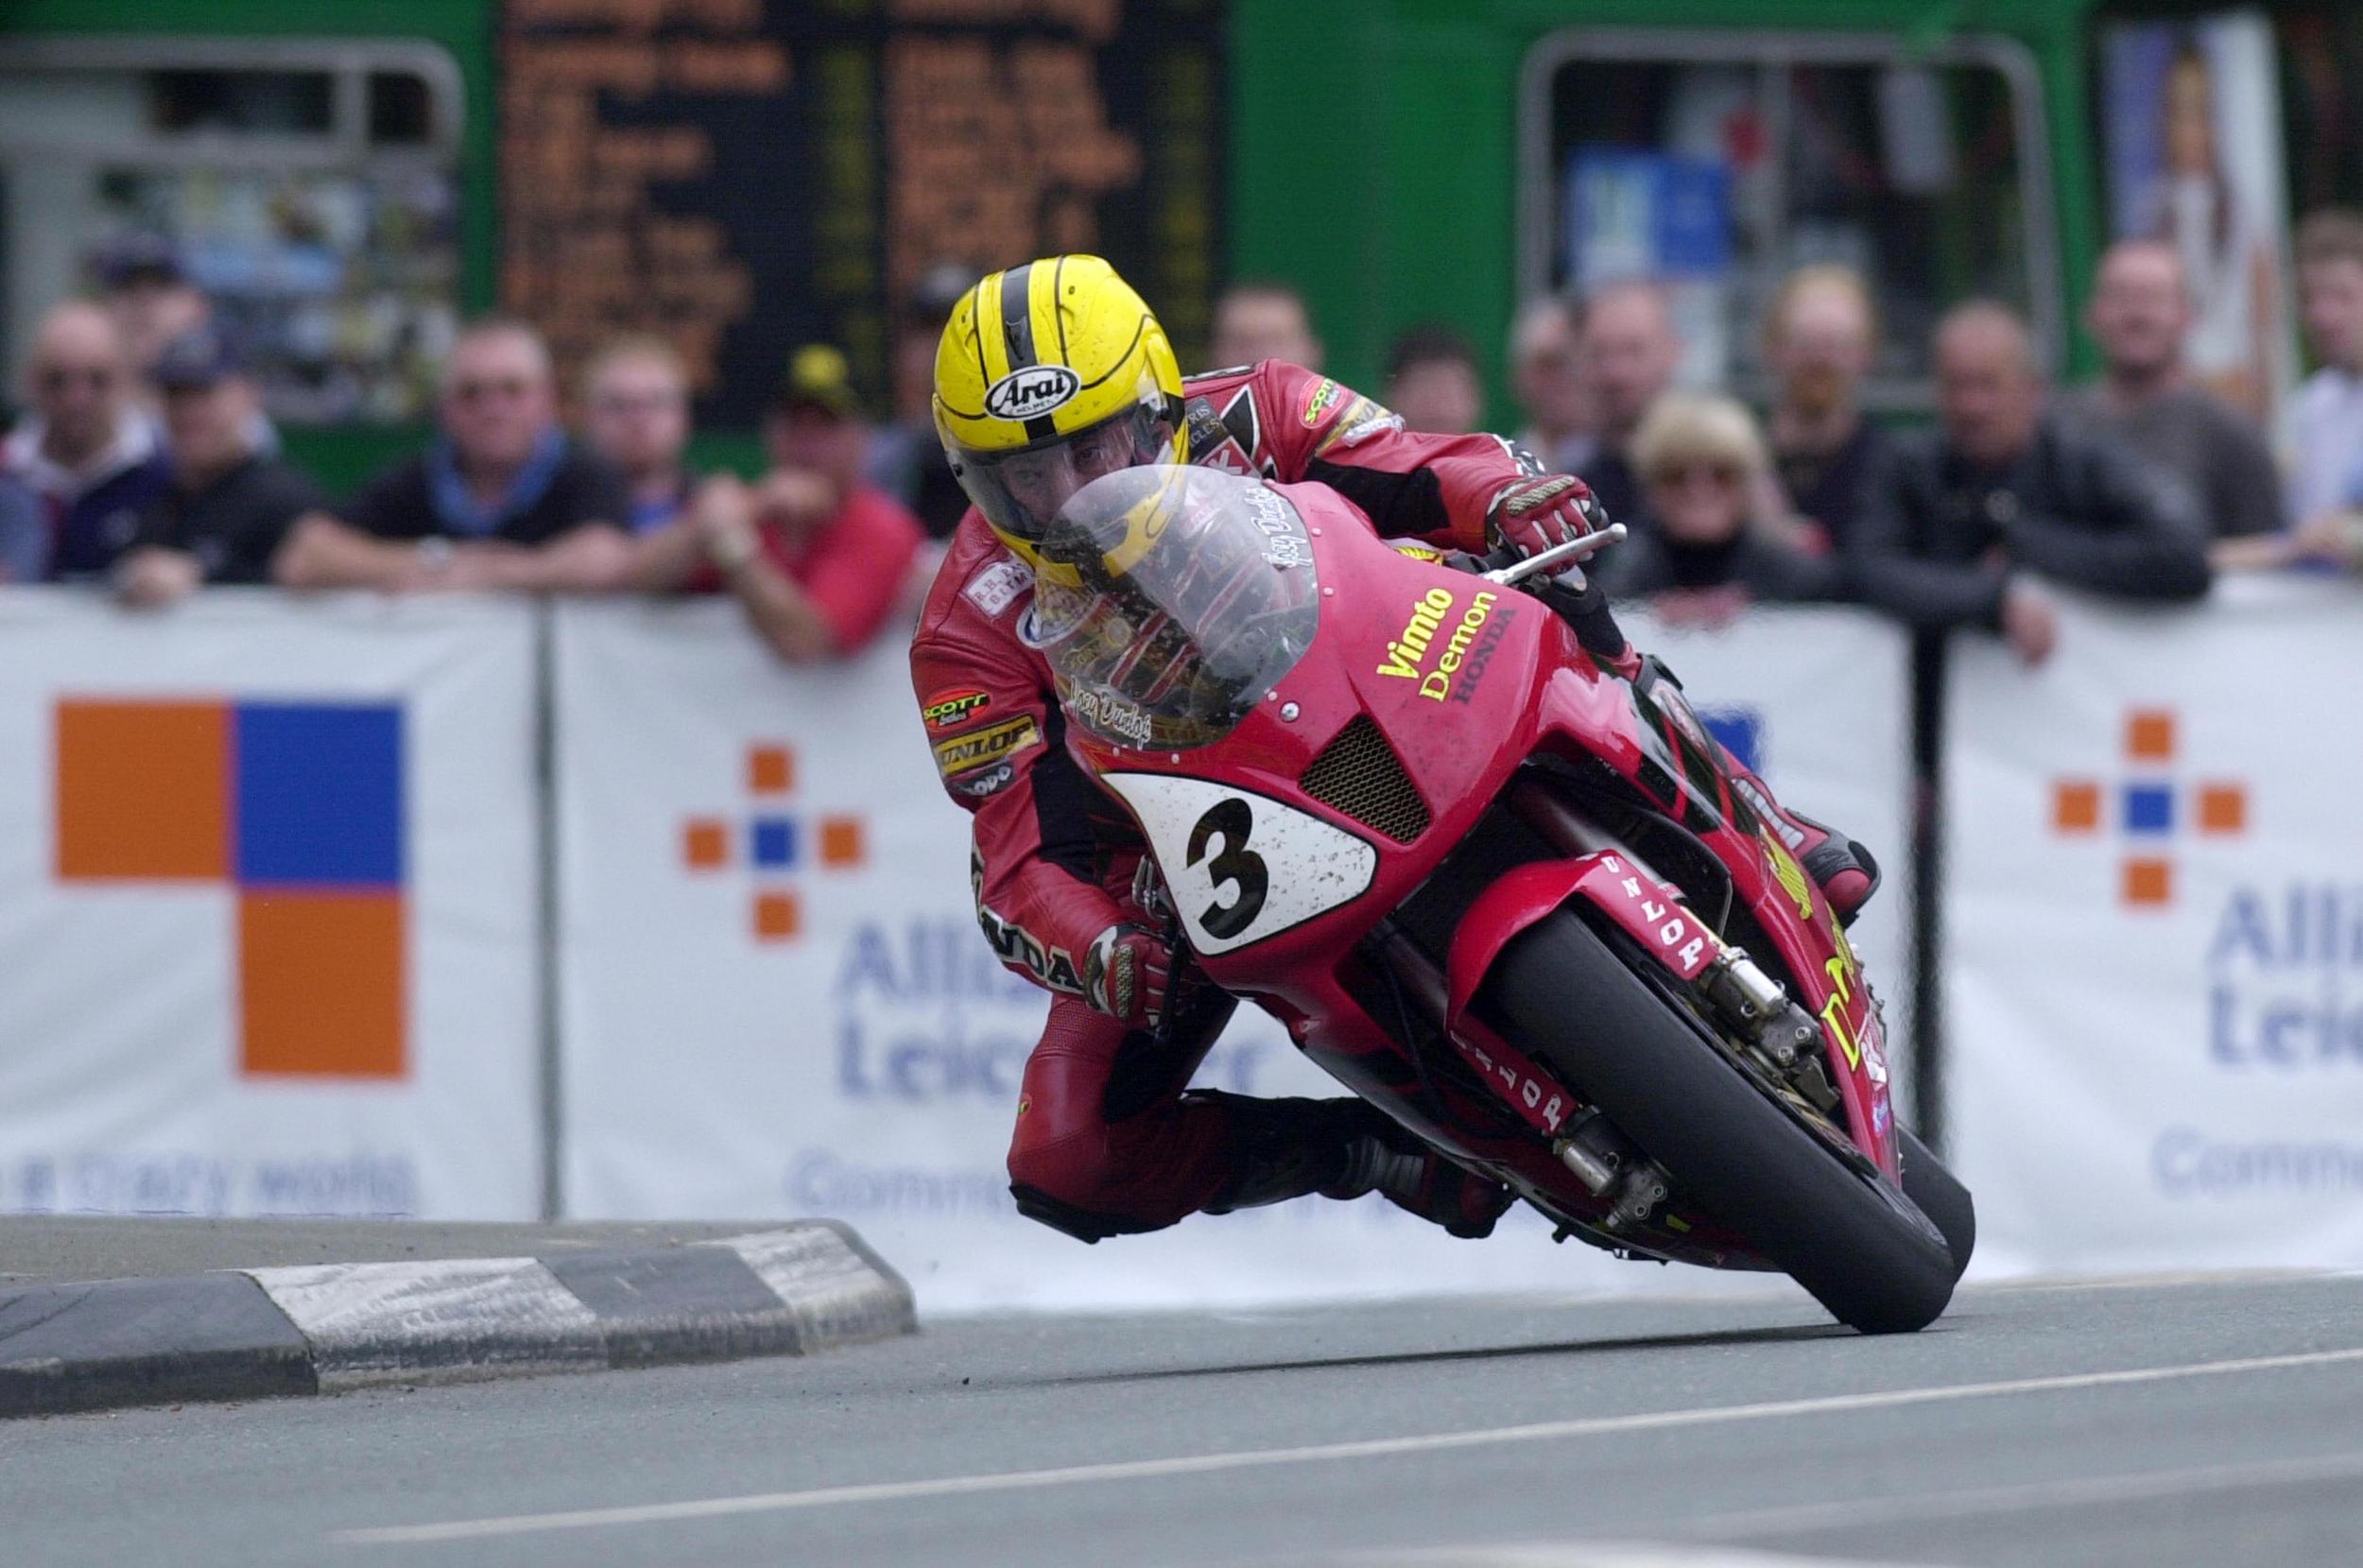 Dunlop blitzed his way to victory on board the Honda SP1 in the Formula One TT